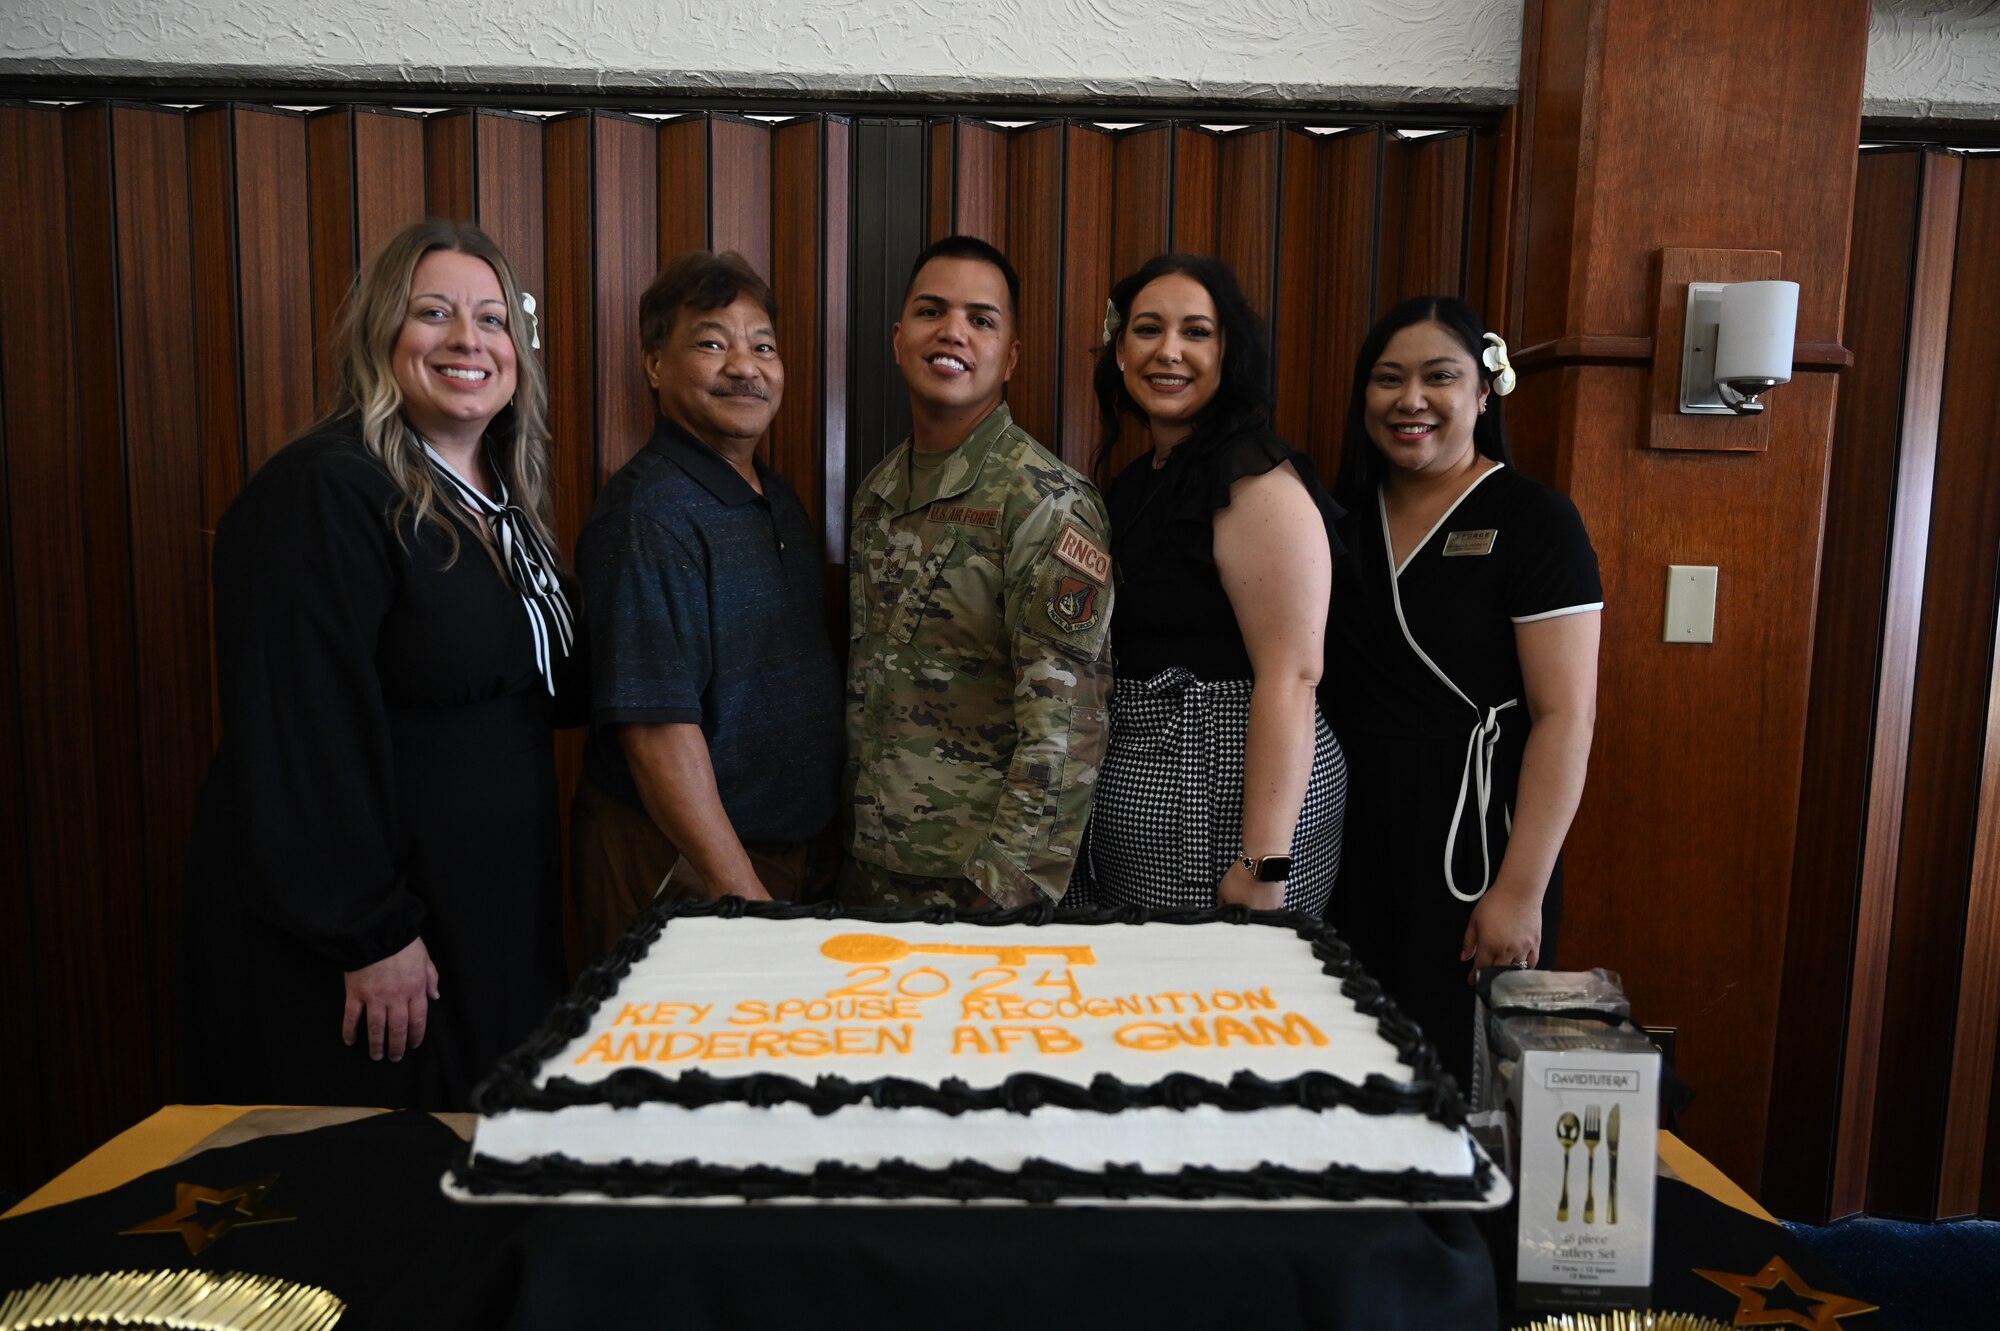 Members of the Key Spouse program along with an Airman pose for a group photo behind a cake.